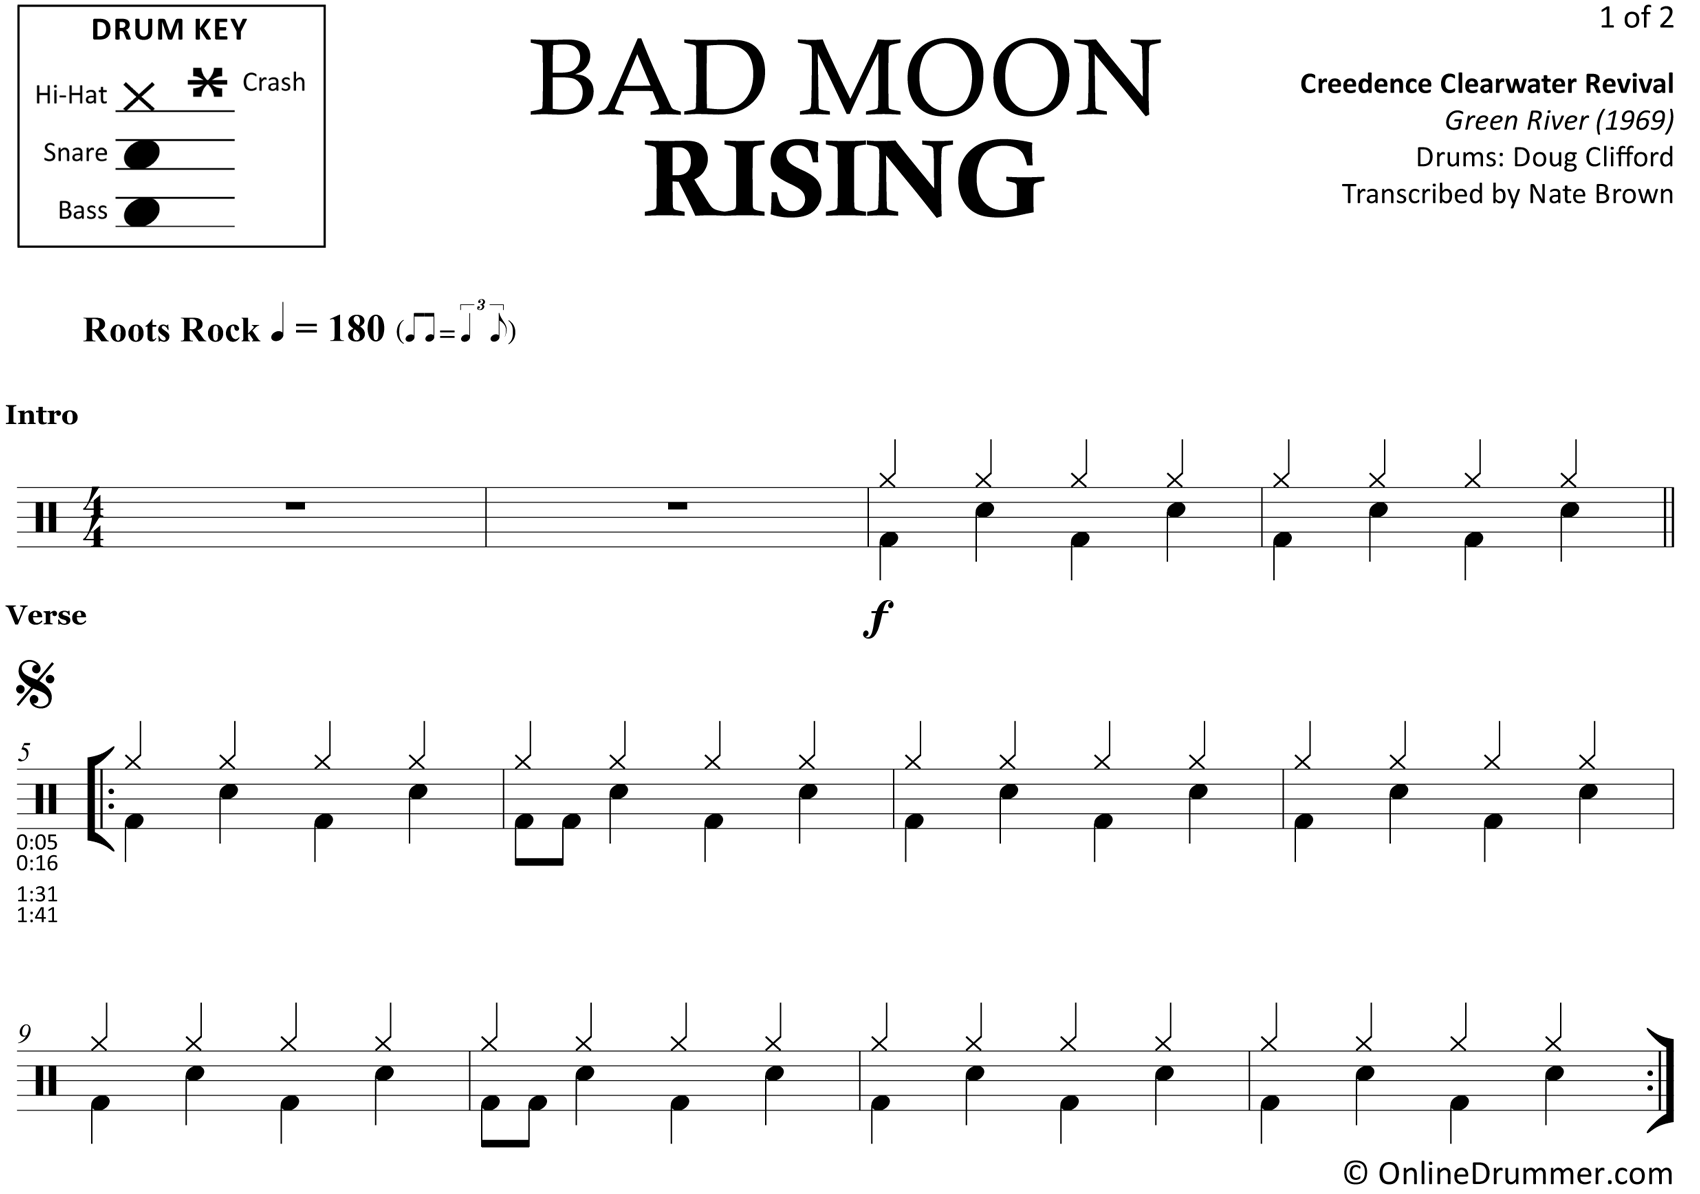 Bad Moon Rising - Creedence Clearwater Revival - Drum Sheet Music